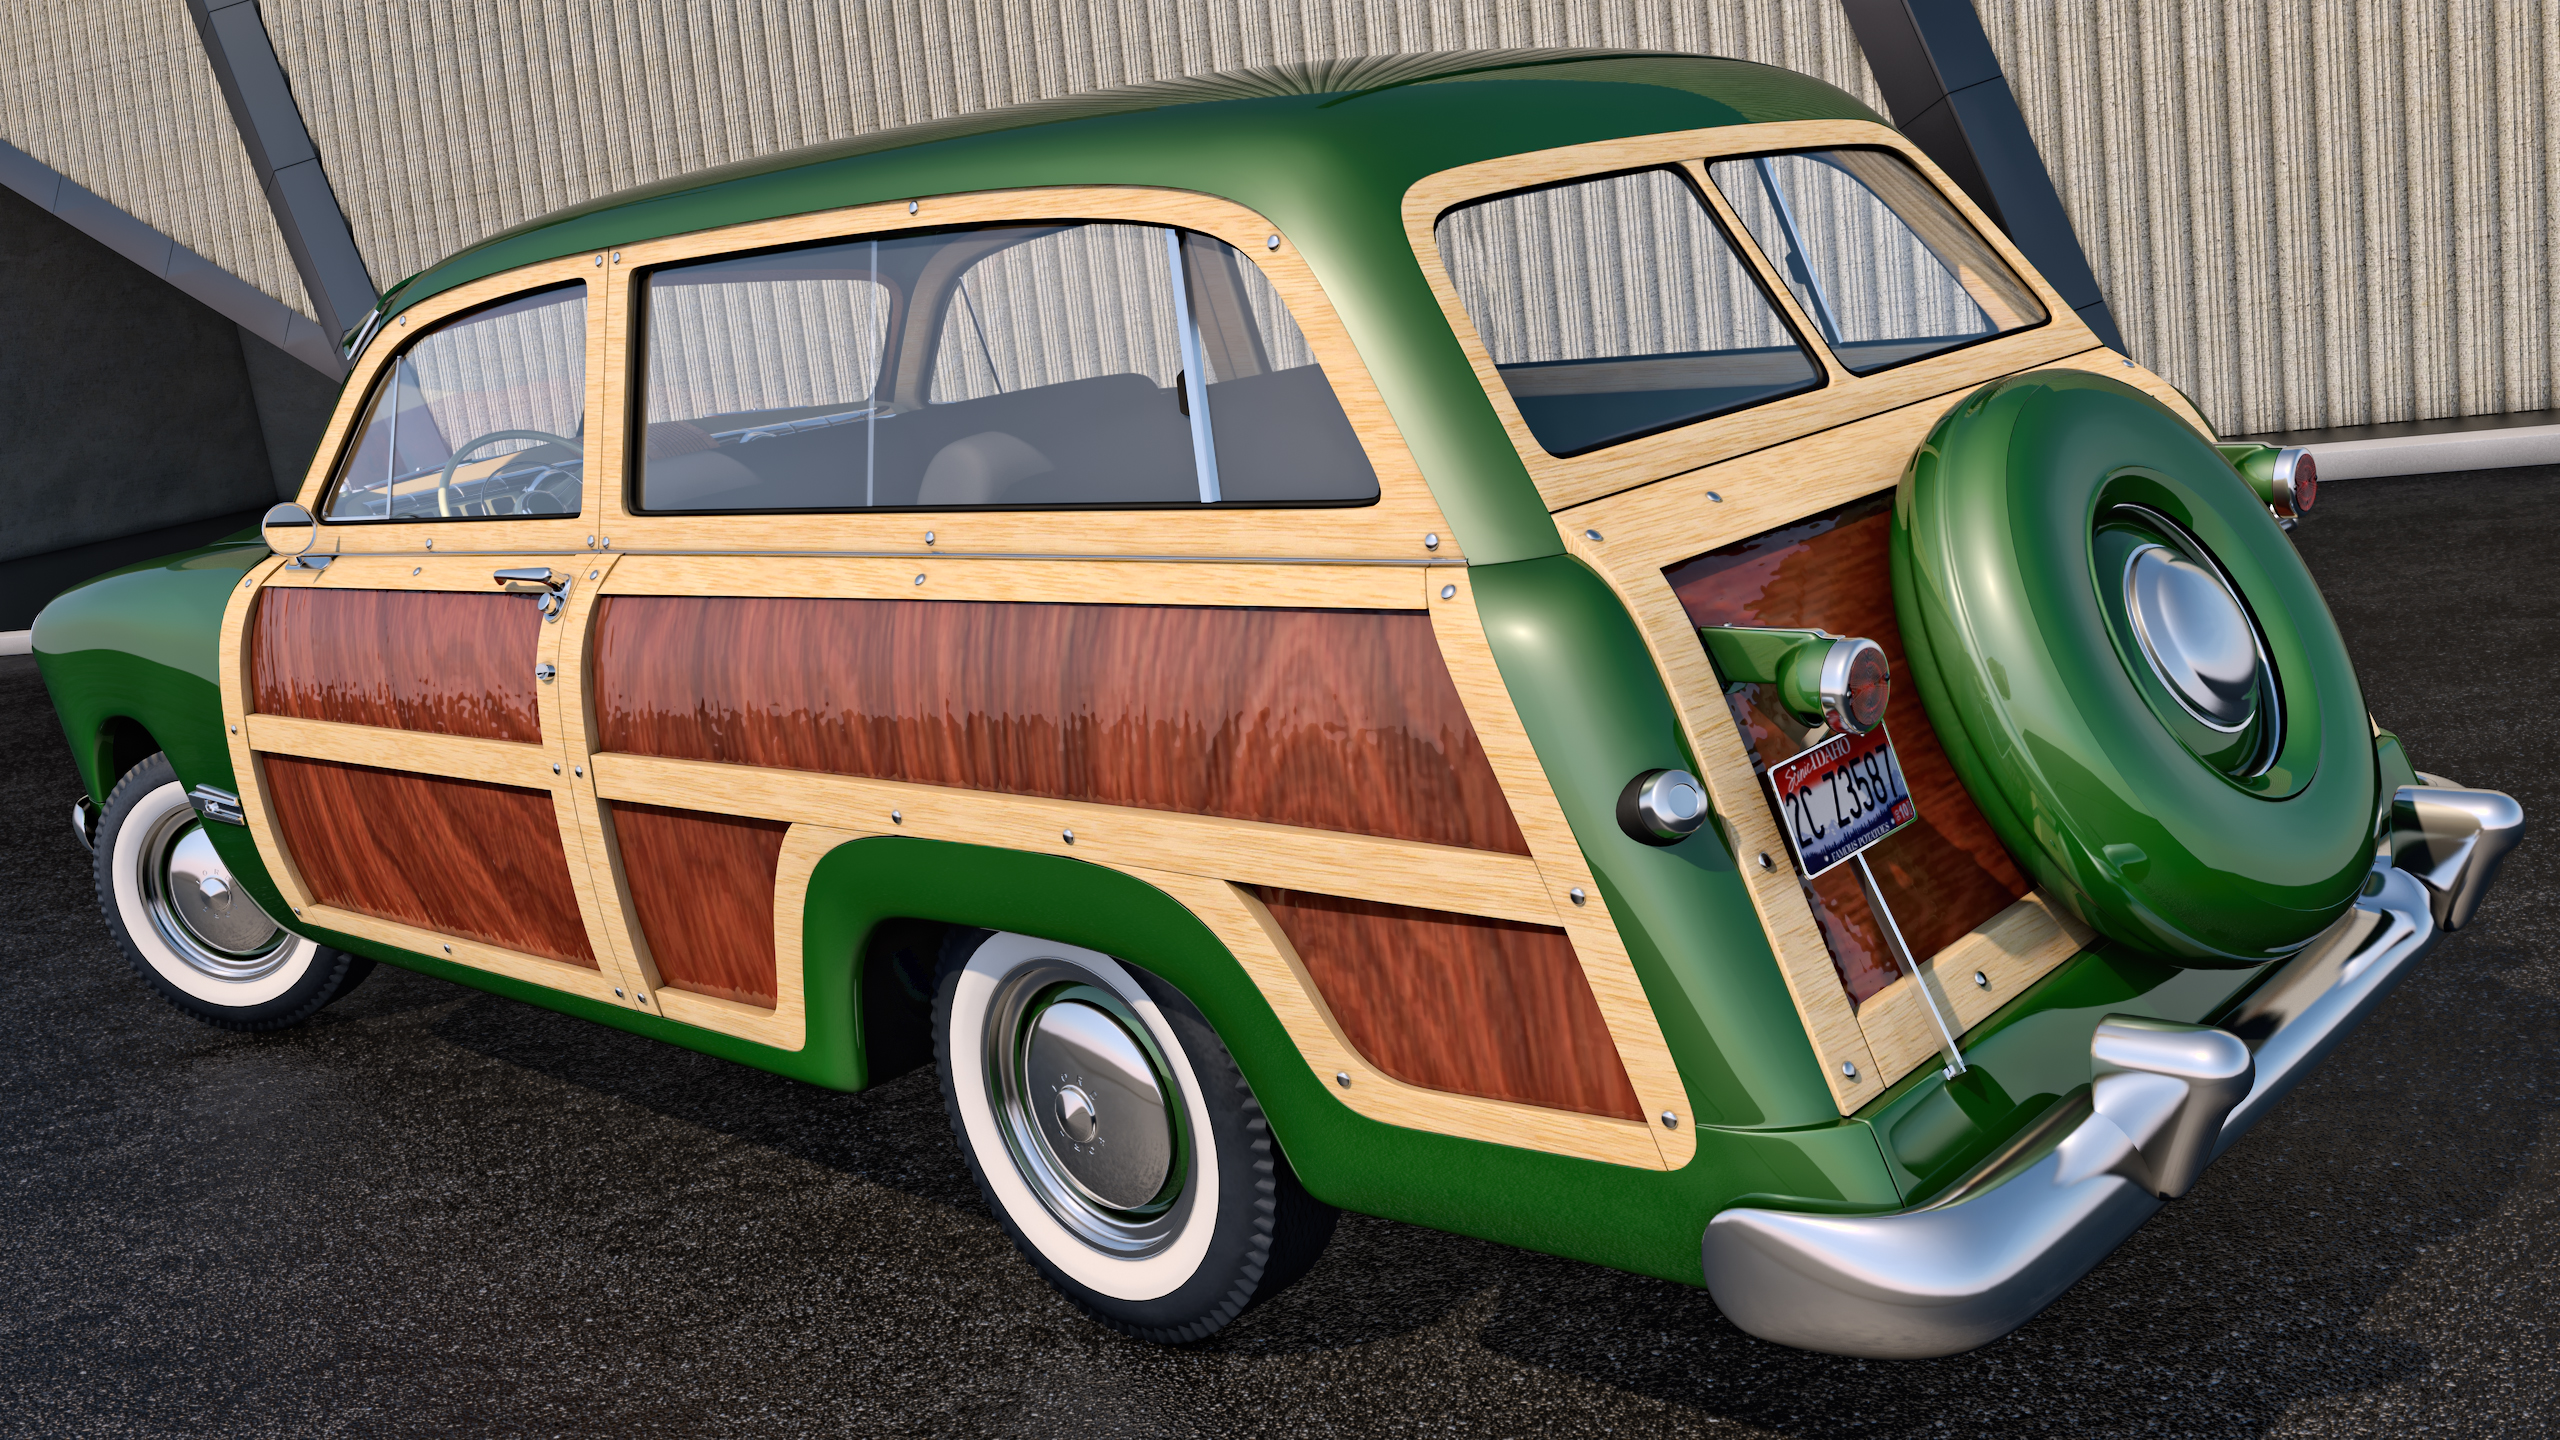 1949 Ford Woody Station Wagon By Samcurry On Deviantart